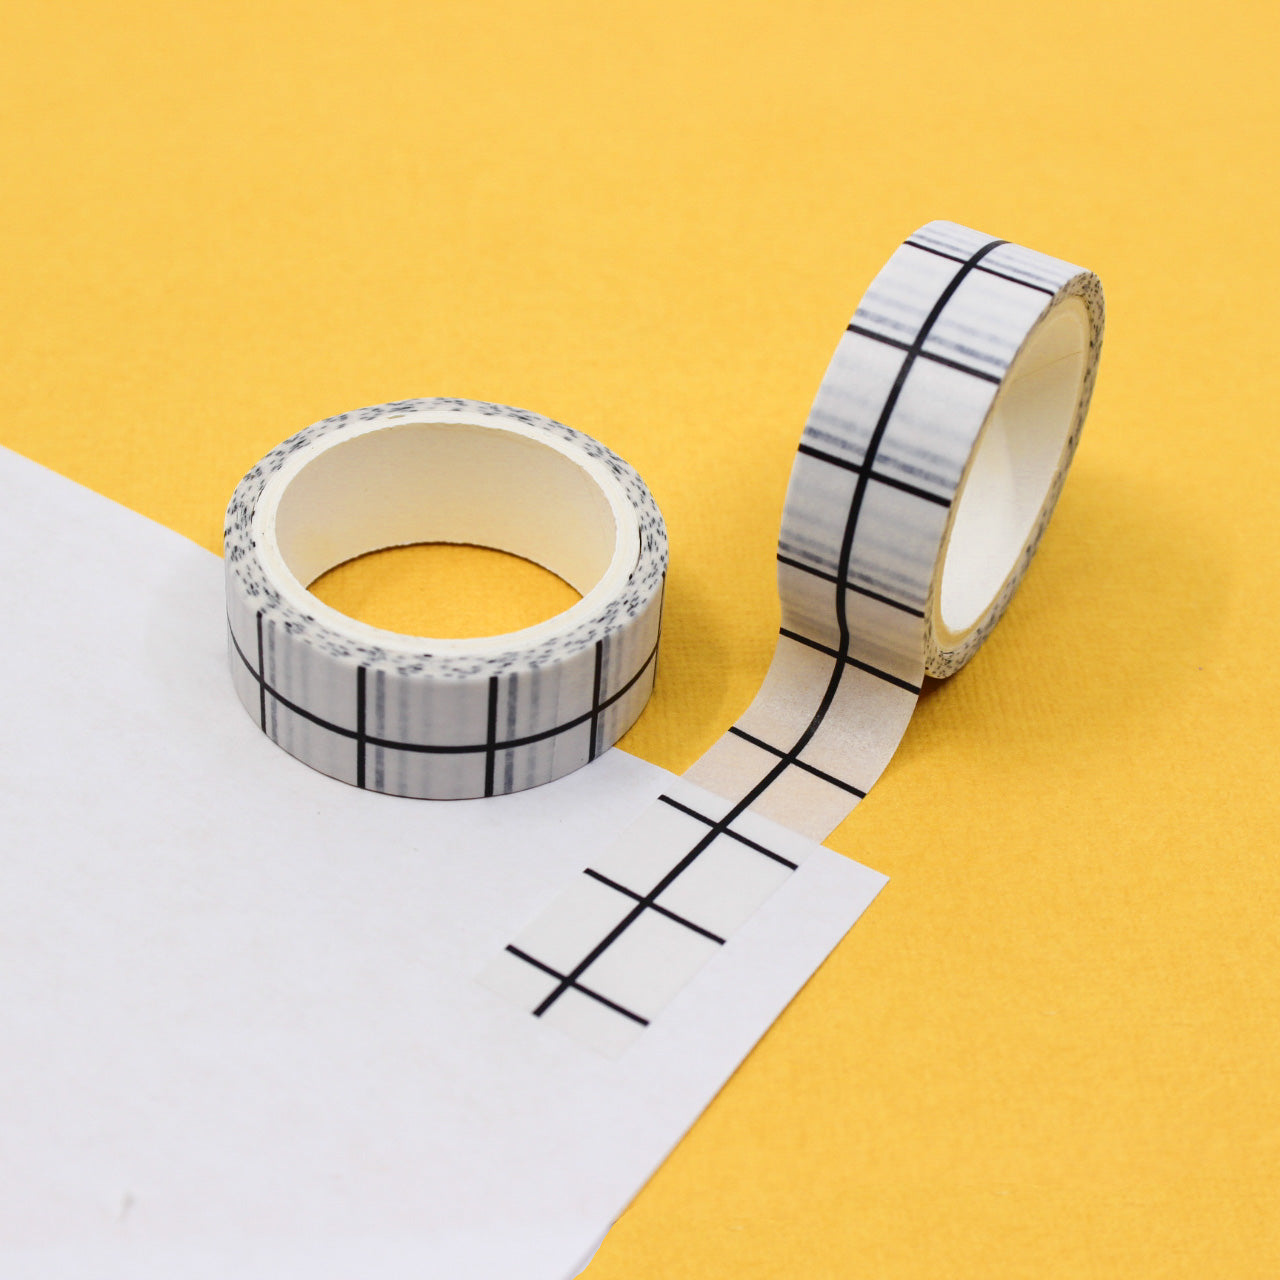 This versatile washi tape features a large white grid plaid design, adding a modern and clean look to your projects. Ideal for bullet journaling, scrapbooking, and various crafts, this tape offers endless creative possibilities. This tape is sold at BBB Supplies Craft Shop.